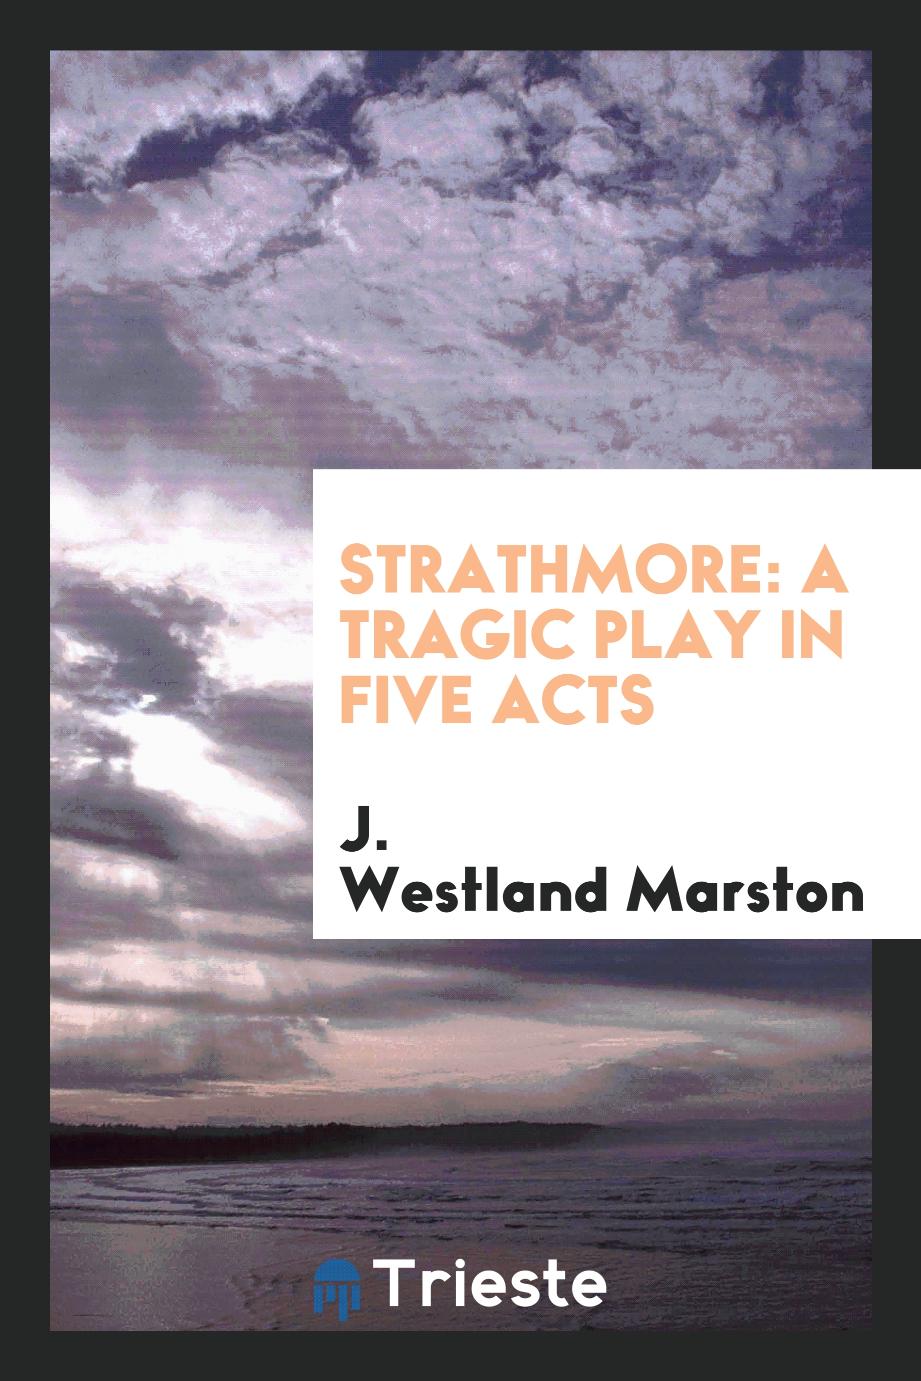 Strathmore: A Tragic Play in Five Acts